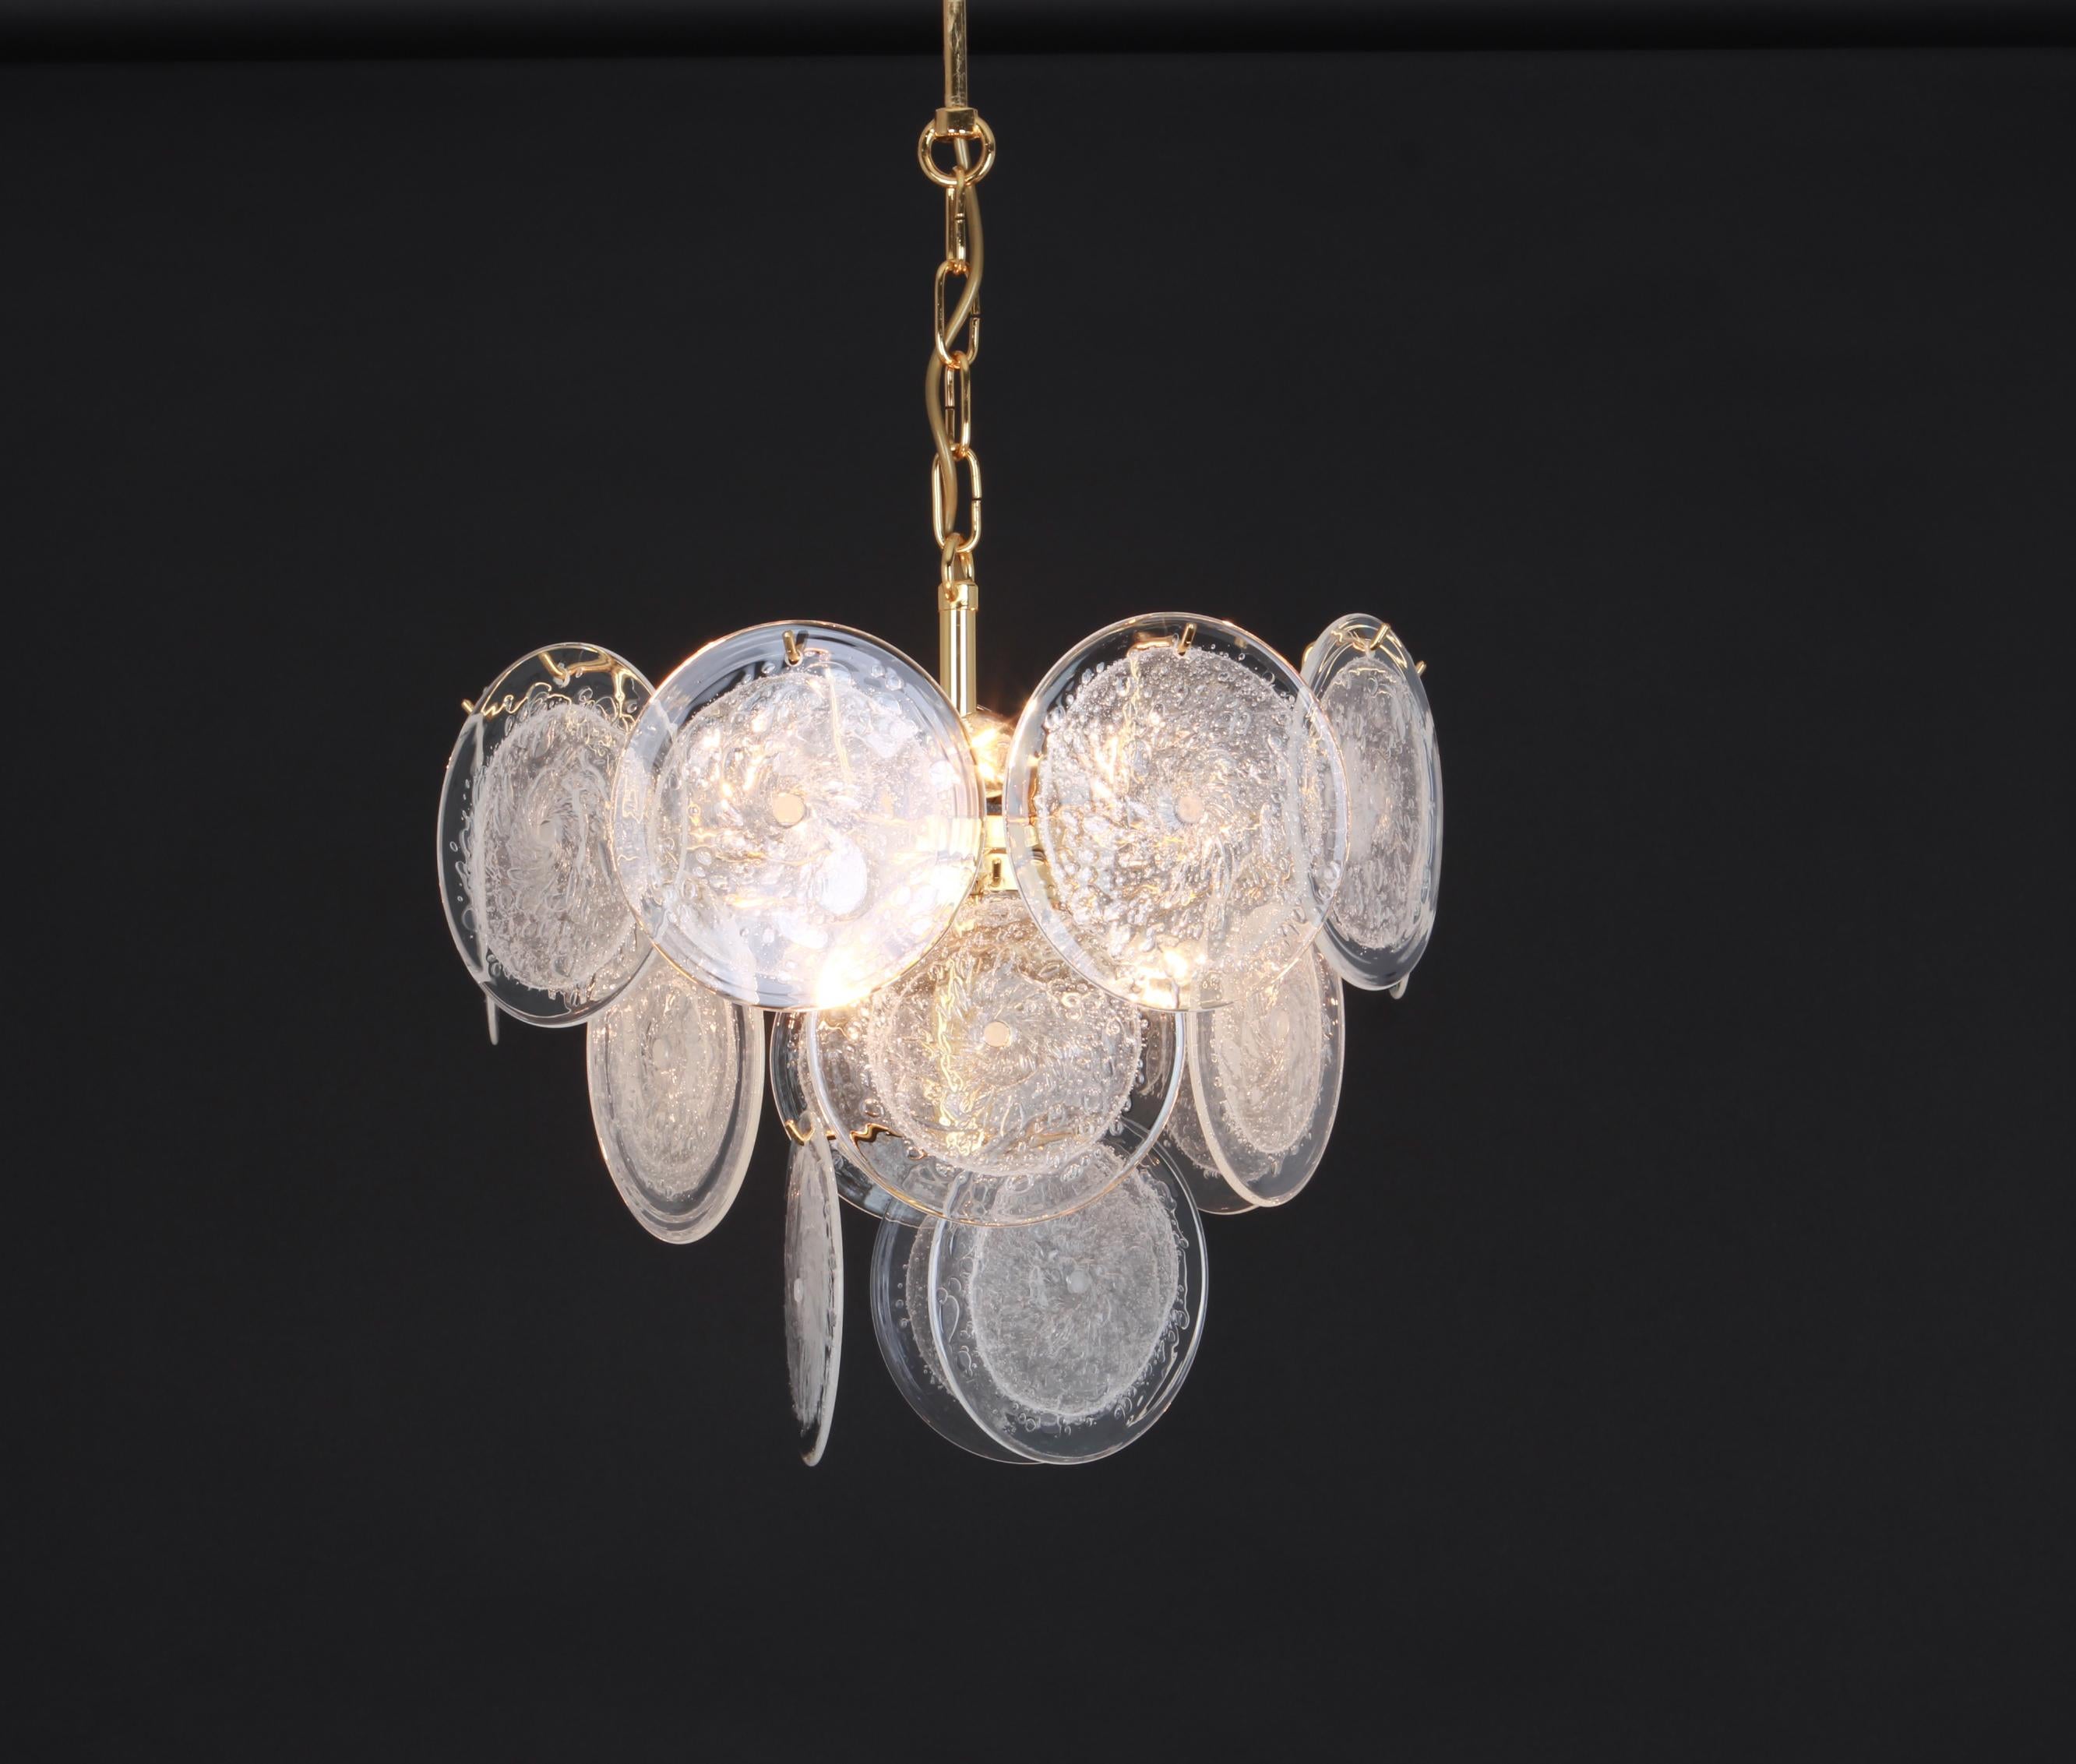 Wonderful ice glass disc chandelier by Vistosi, Italy, 1970s.

This spectacular mouth-blown glass disc chandelier is characteristic of the design vocabulary of Gino Vistosi: simple, geometric shapes and monochrome colors executed in the cased